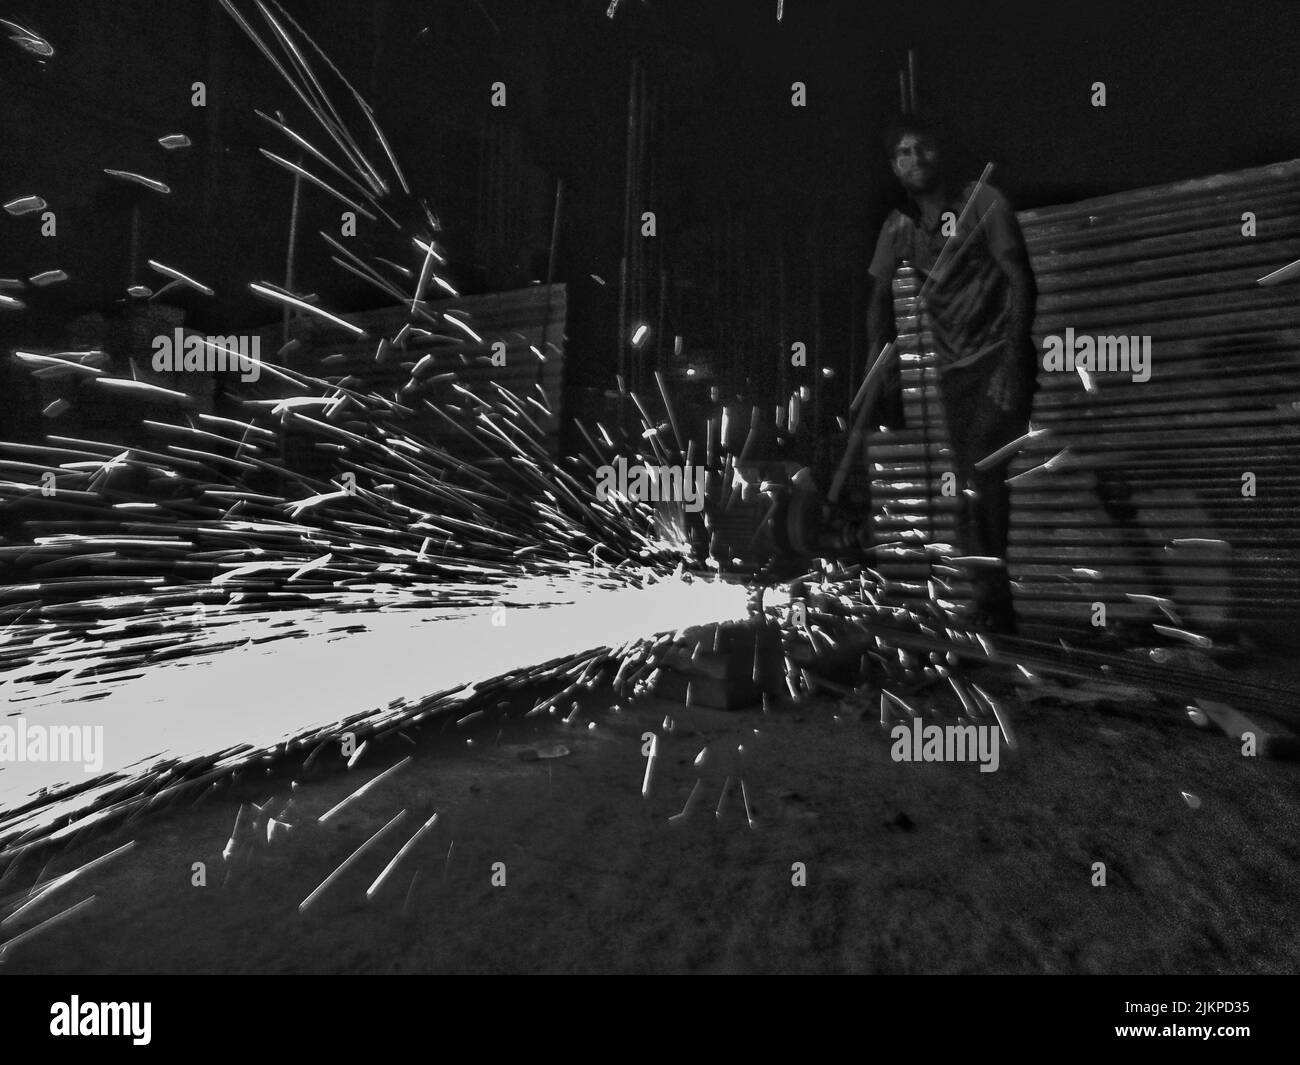 A scene of rod cutting with machine at night, causing sparks, at night. Grey style. Stock Photo